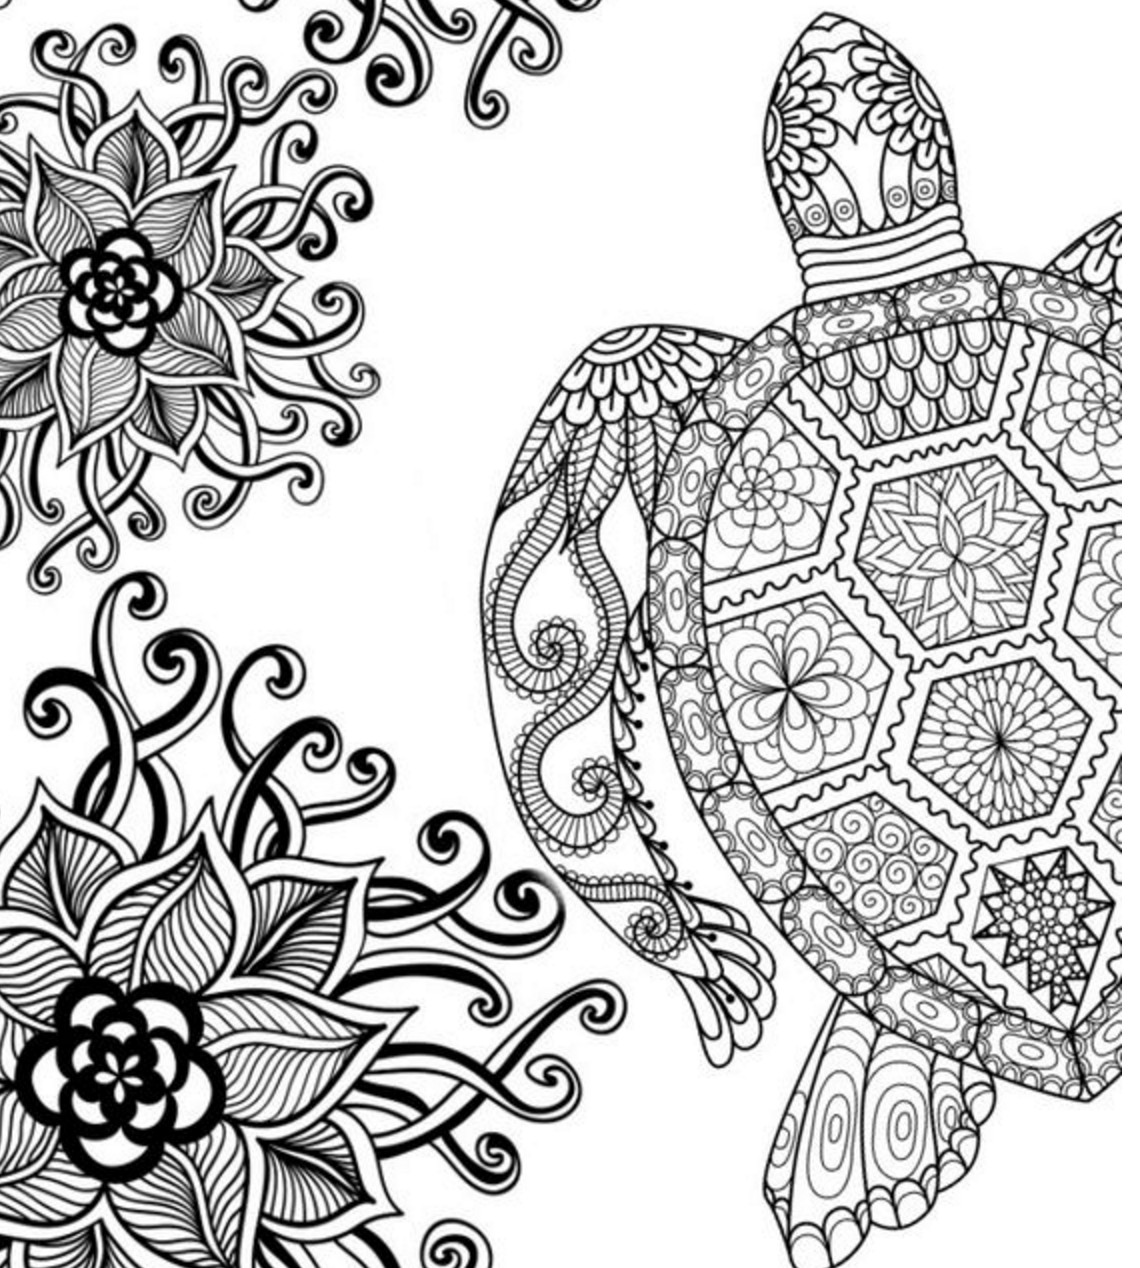 Coloring Pages For Adults To Print
 20 Free Adult Colouring Pages The Organised Housewife